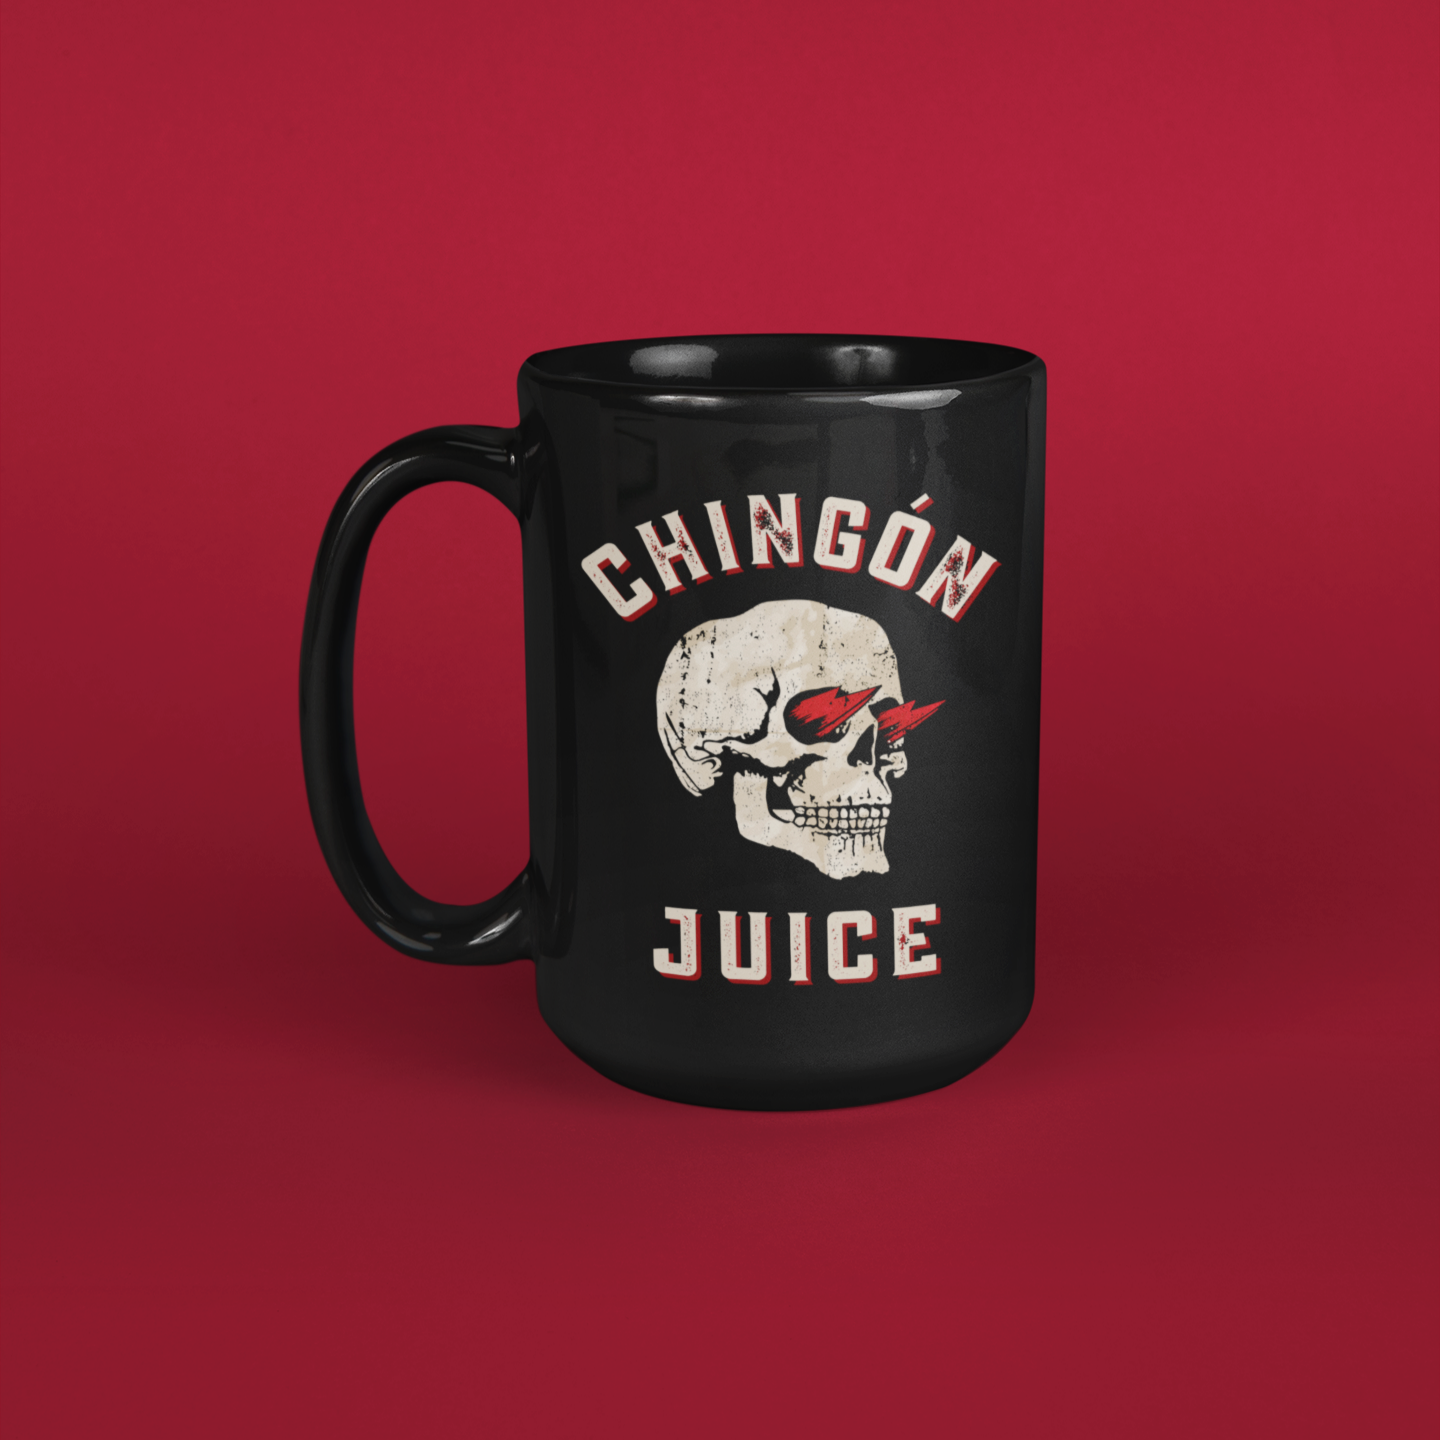 Tall black mug for latino men with a unique design of a skull with flames and the words 'Chingon Juice' in vintage-style lettering